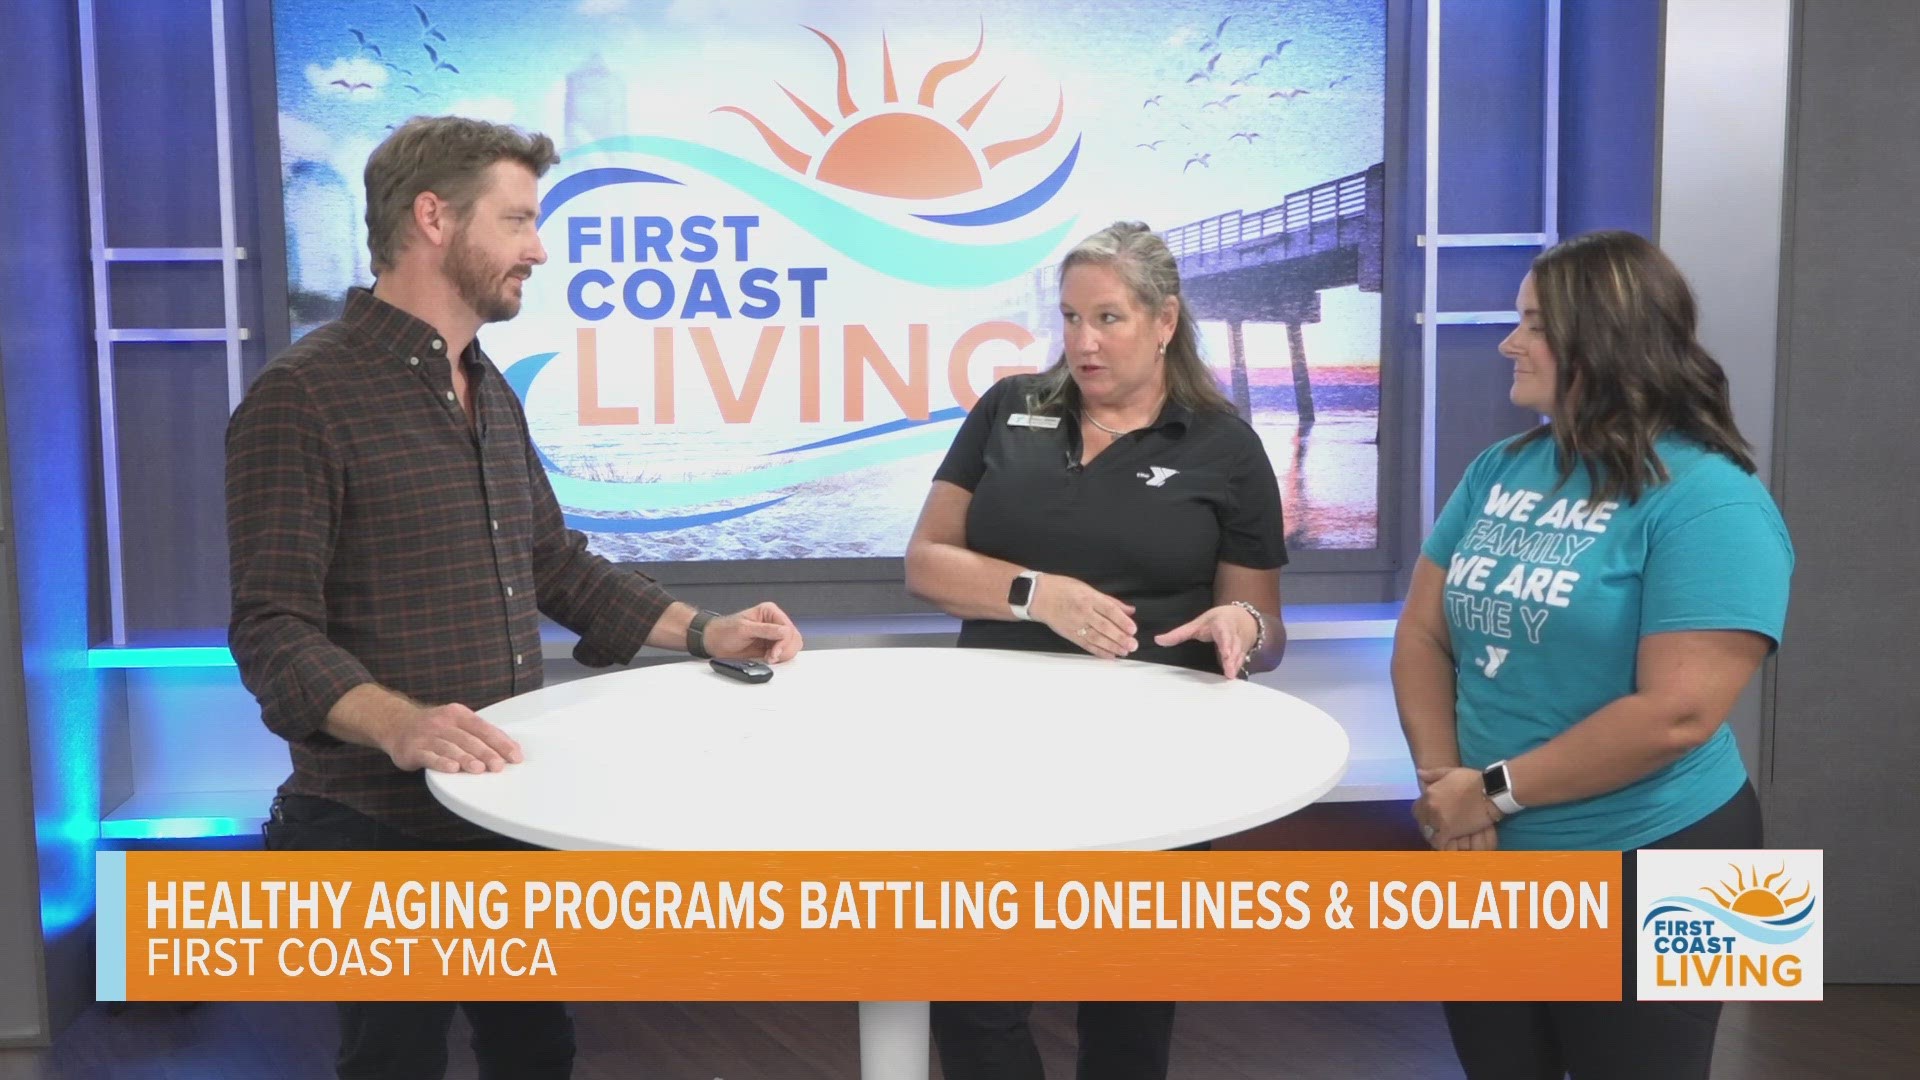 YMCA offers healthy aging programs that battle loneliness and isolation